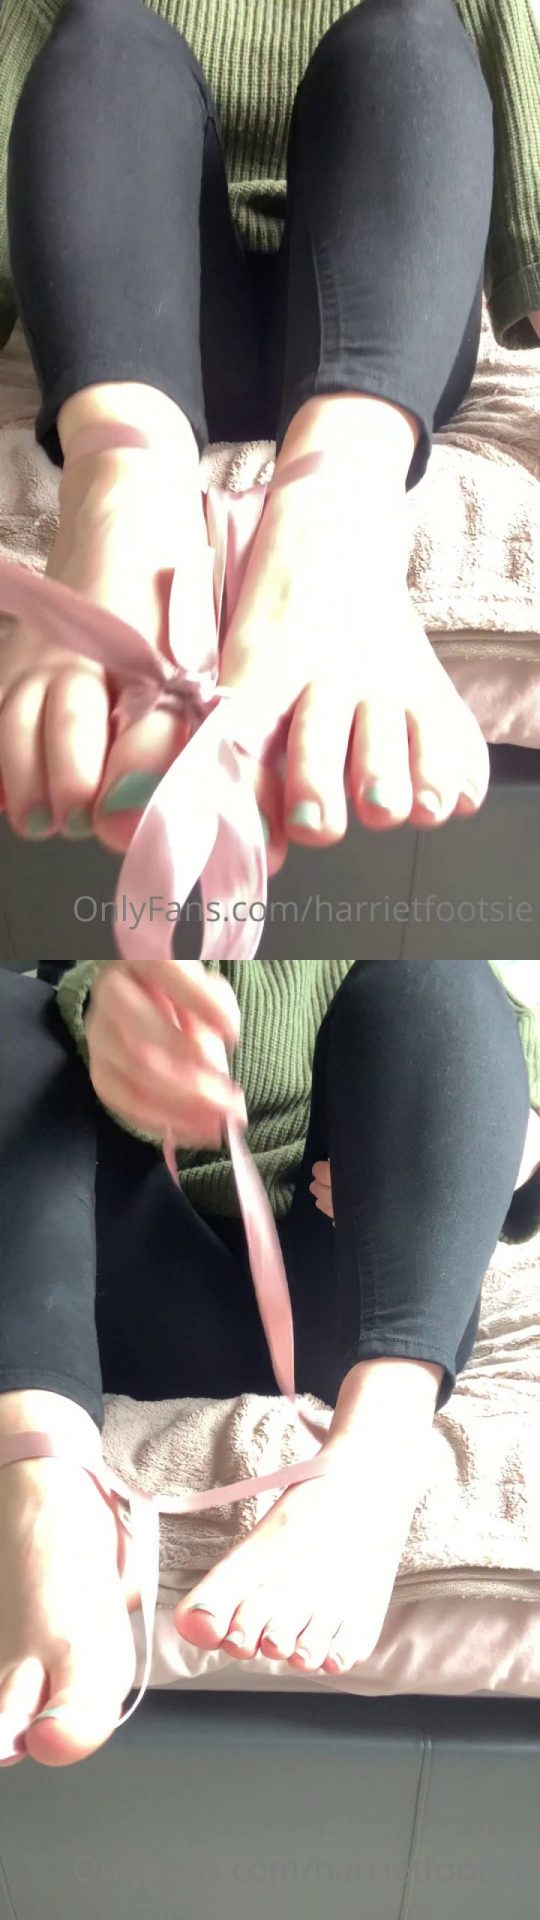 harrietfootsie 30 04 2021 2097206252 got asked to make another video of my feet all tied up the first video i didn t do it v